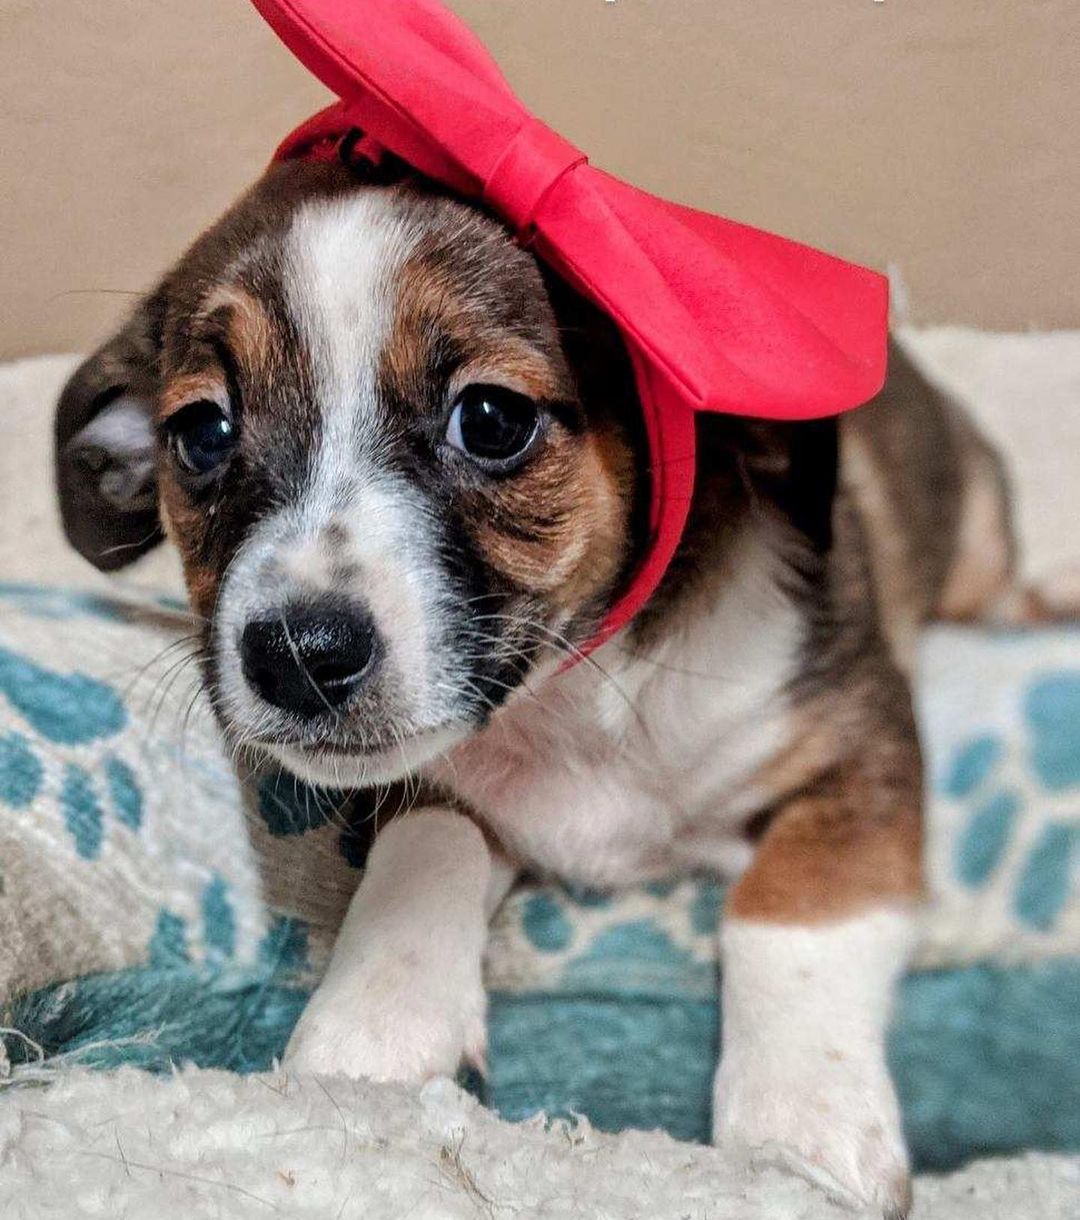 Hello everyone! Meet Pumpkin Spice. She is 6.5 weeks old and a cutie 🥰 She will be available for adoption soon. 

Forms can be found on our website.